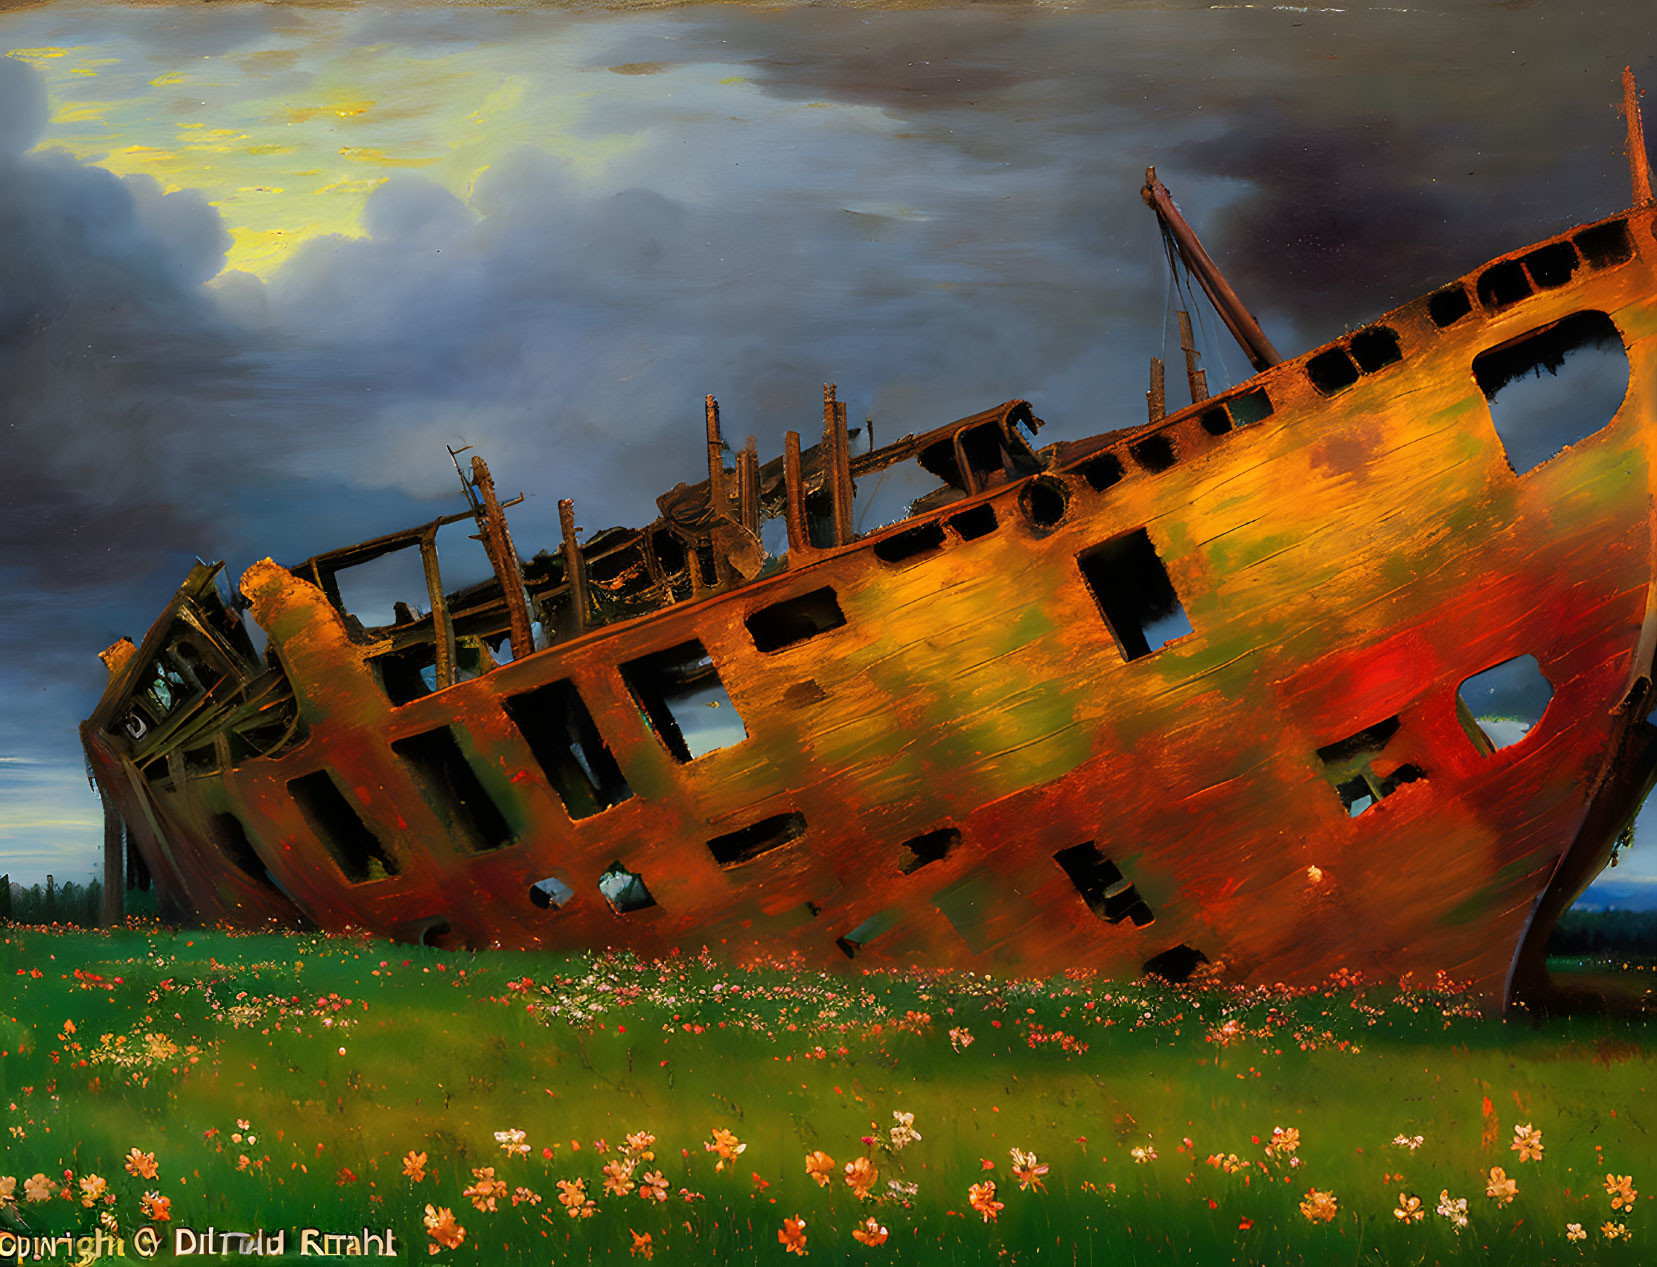 Rusting shipwreck on blooming field under dramatic dusk sky